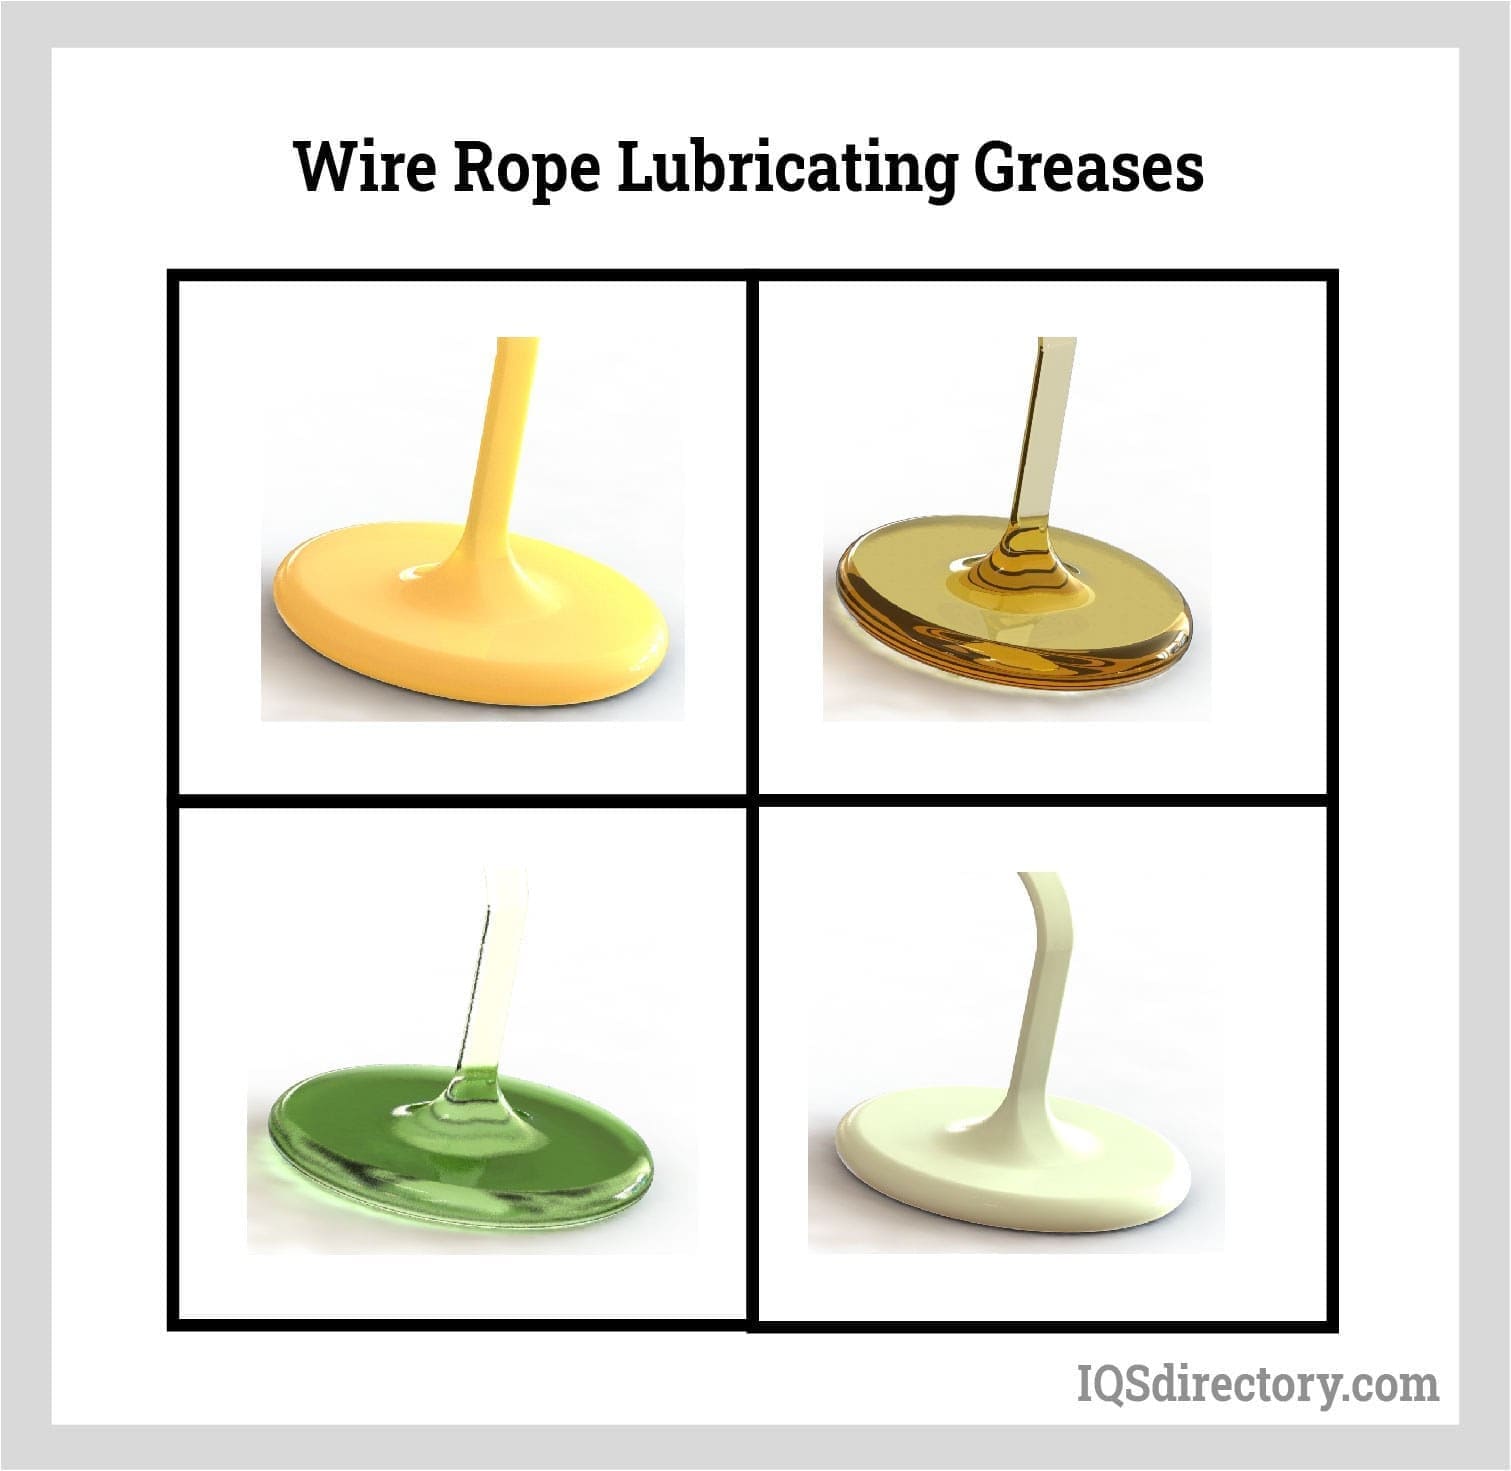 Wire Rope Lubricating Greases